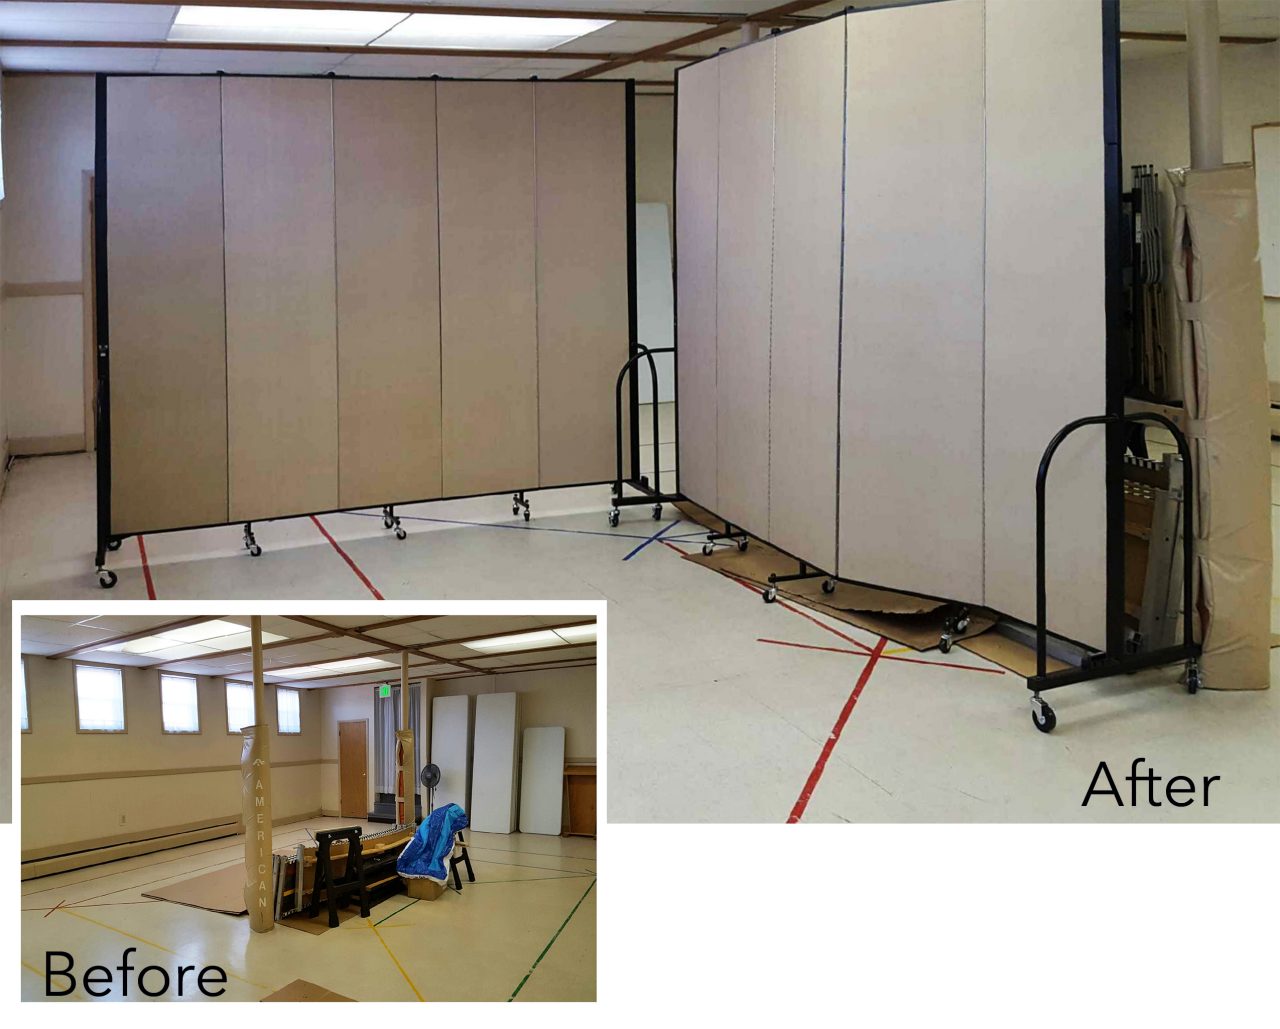 Movable church partitions create much needed space